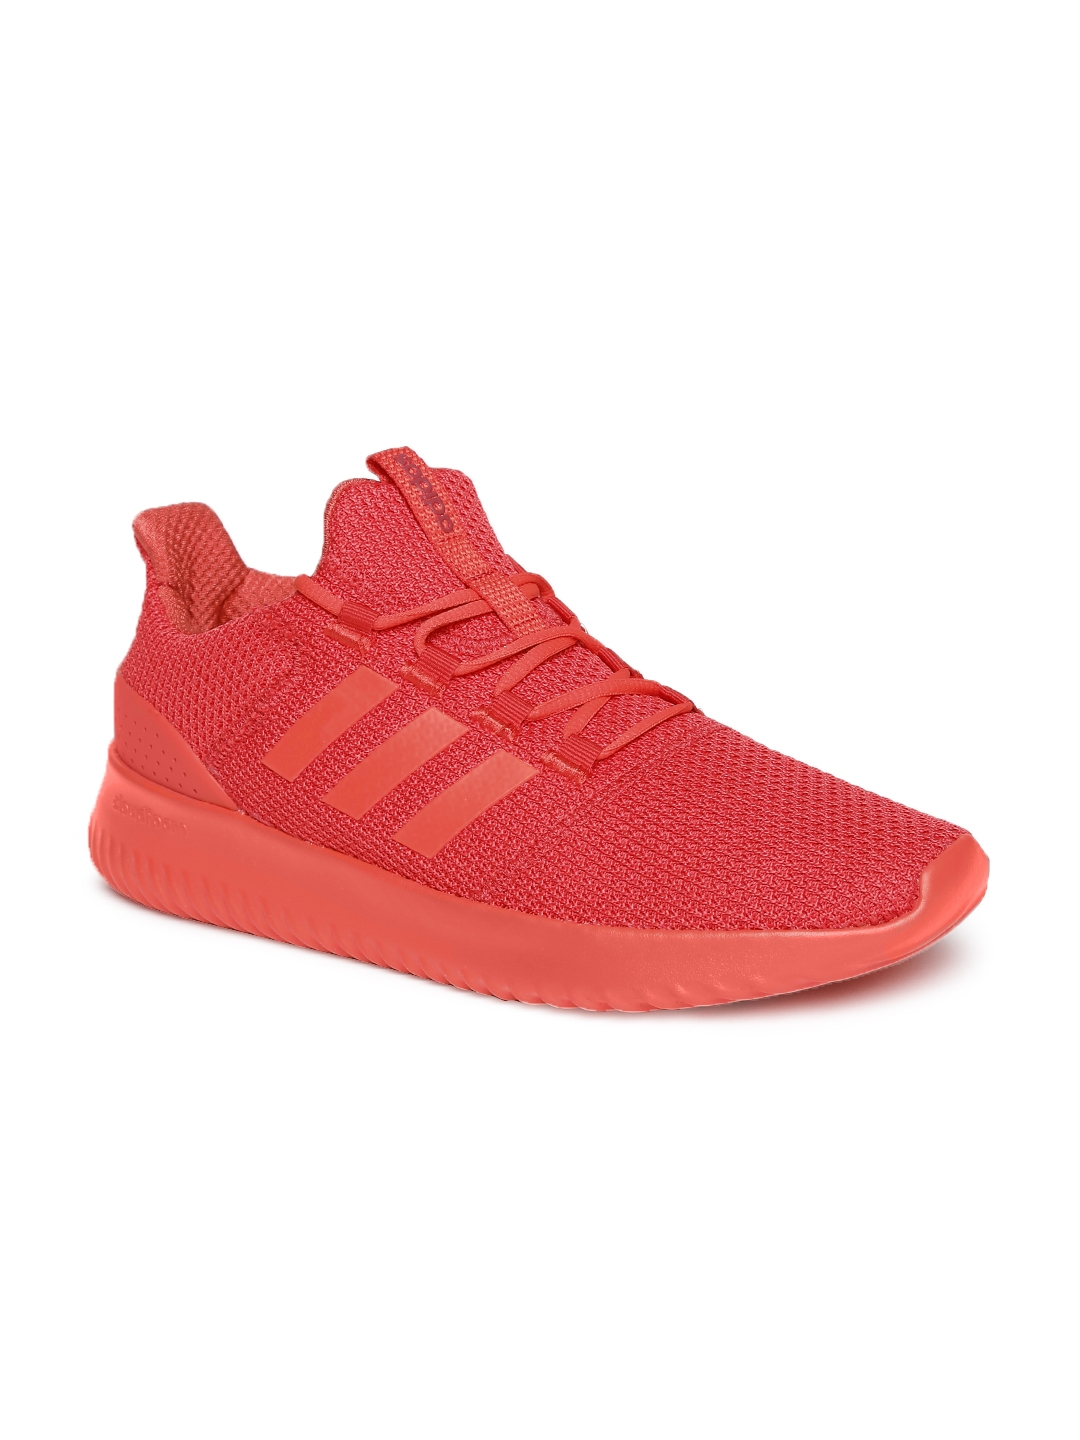 adidas neo 4 shoes